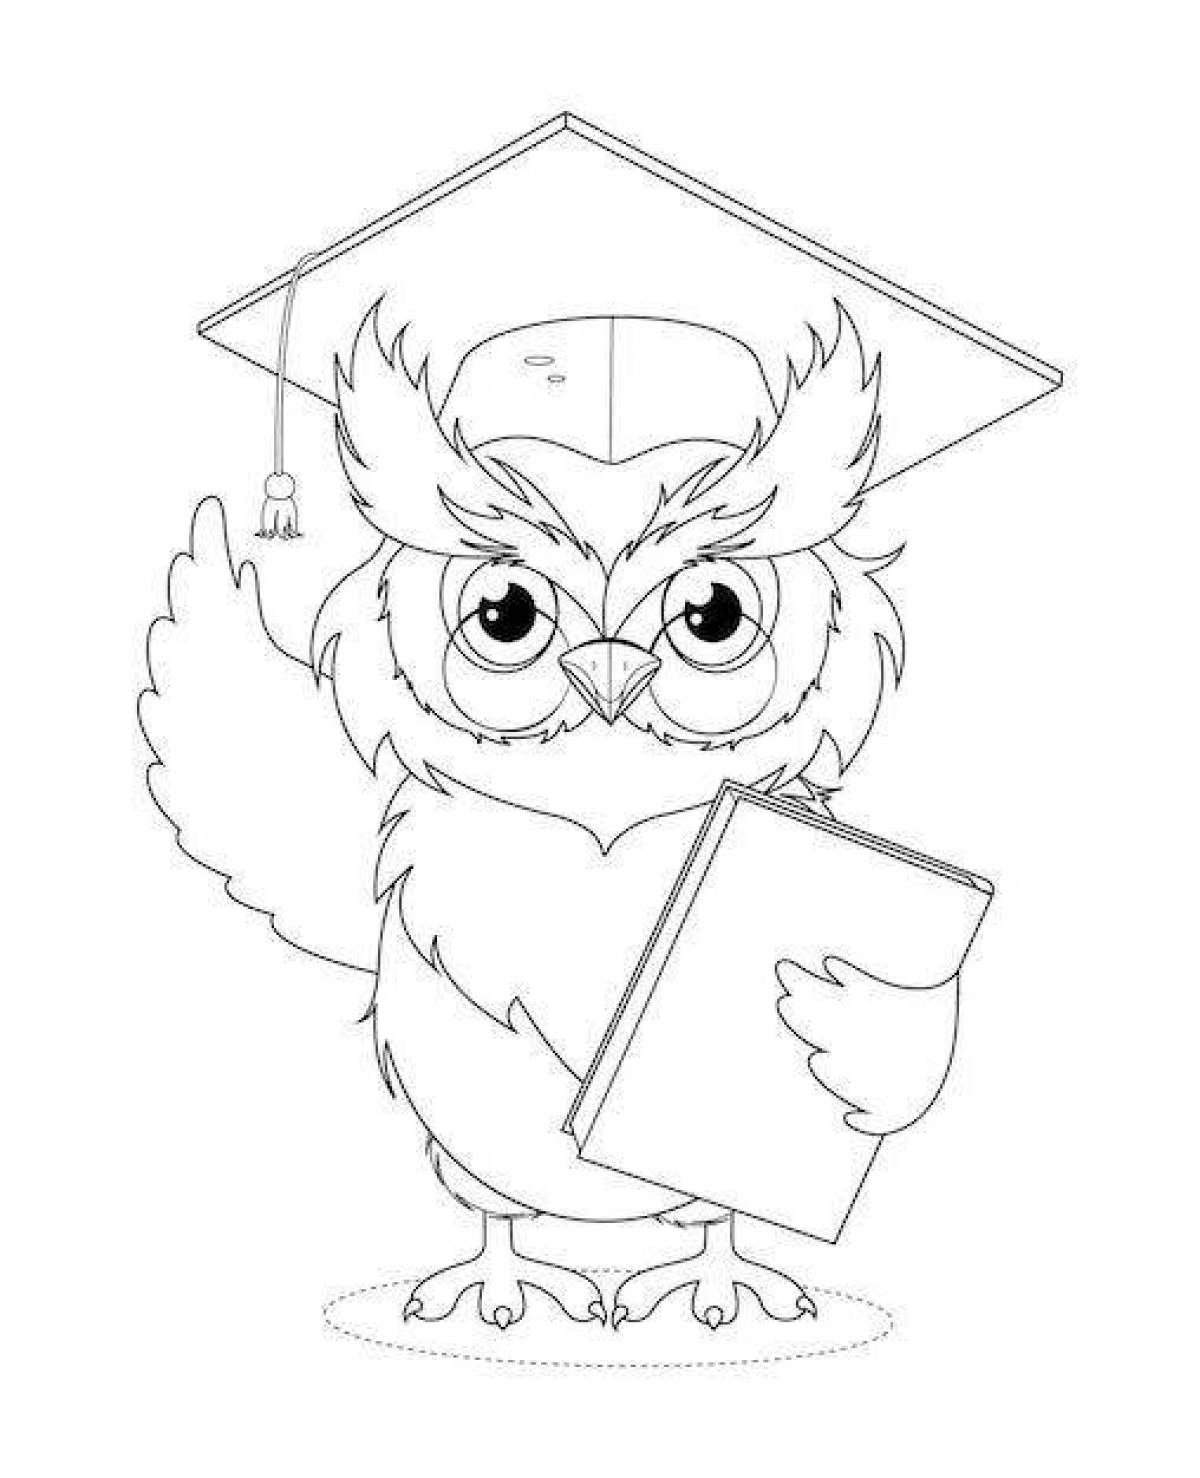 Coloring book wise clever owl